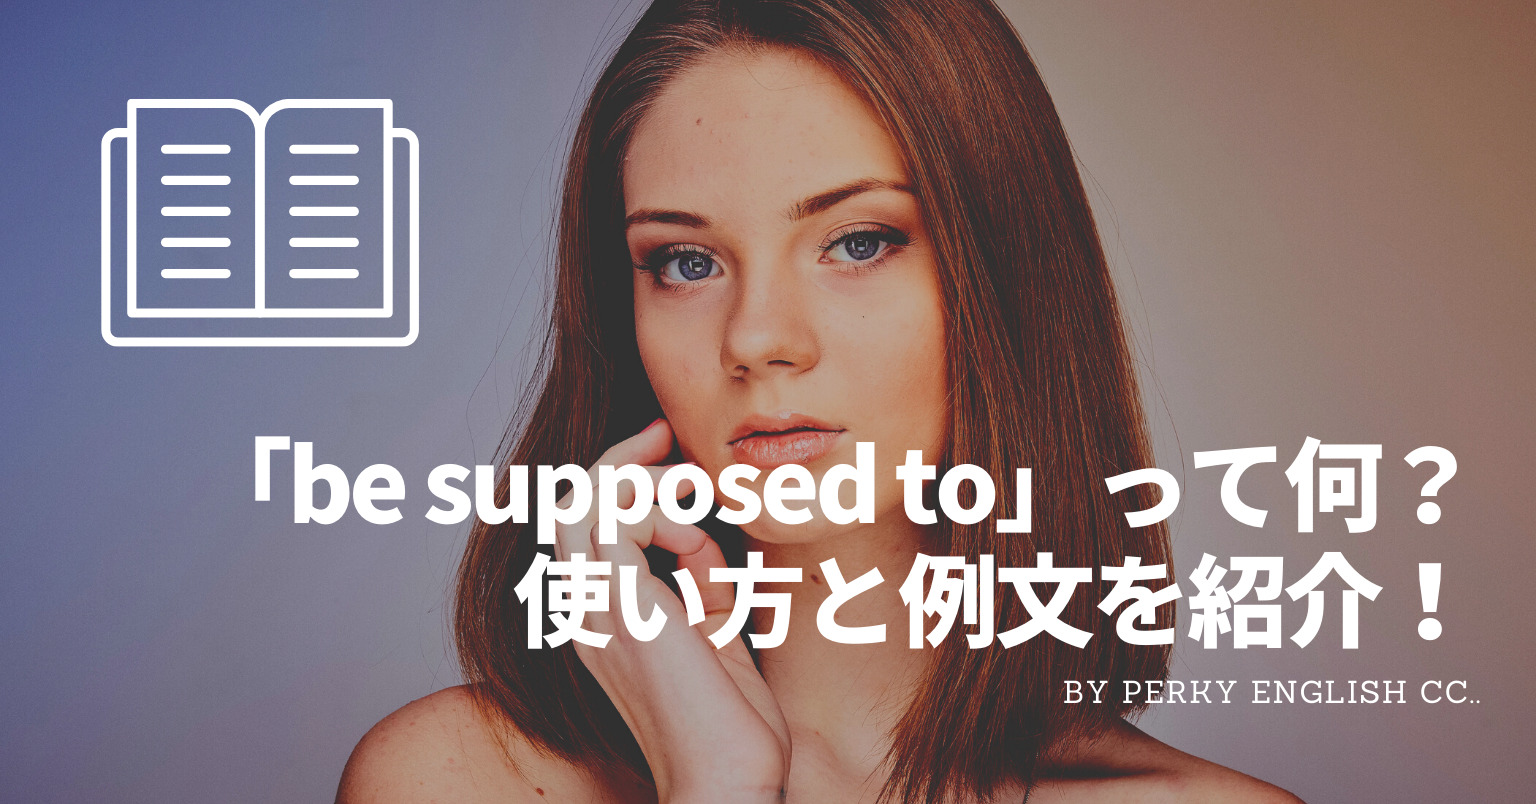 be supposed toってどういう意味？使える英語表現と例文を紹介！